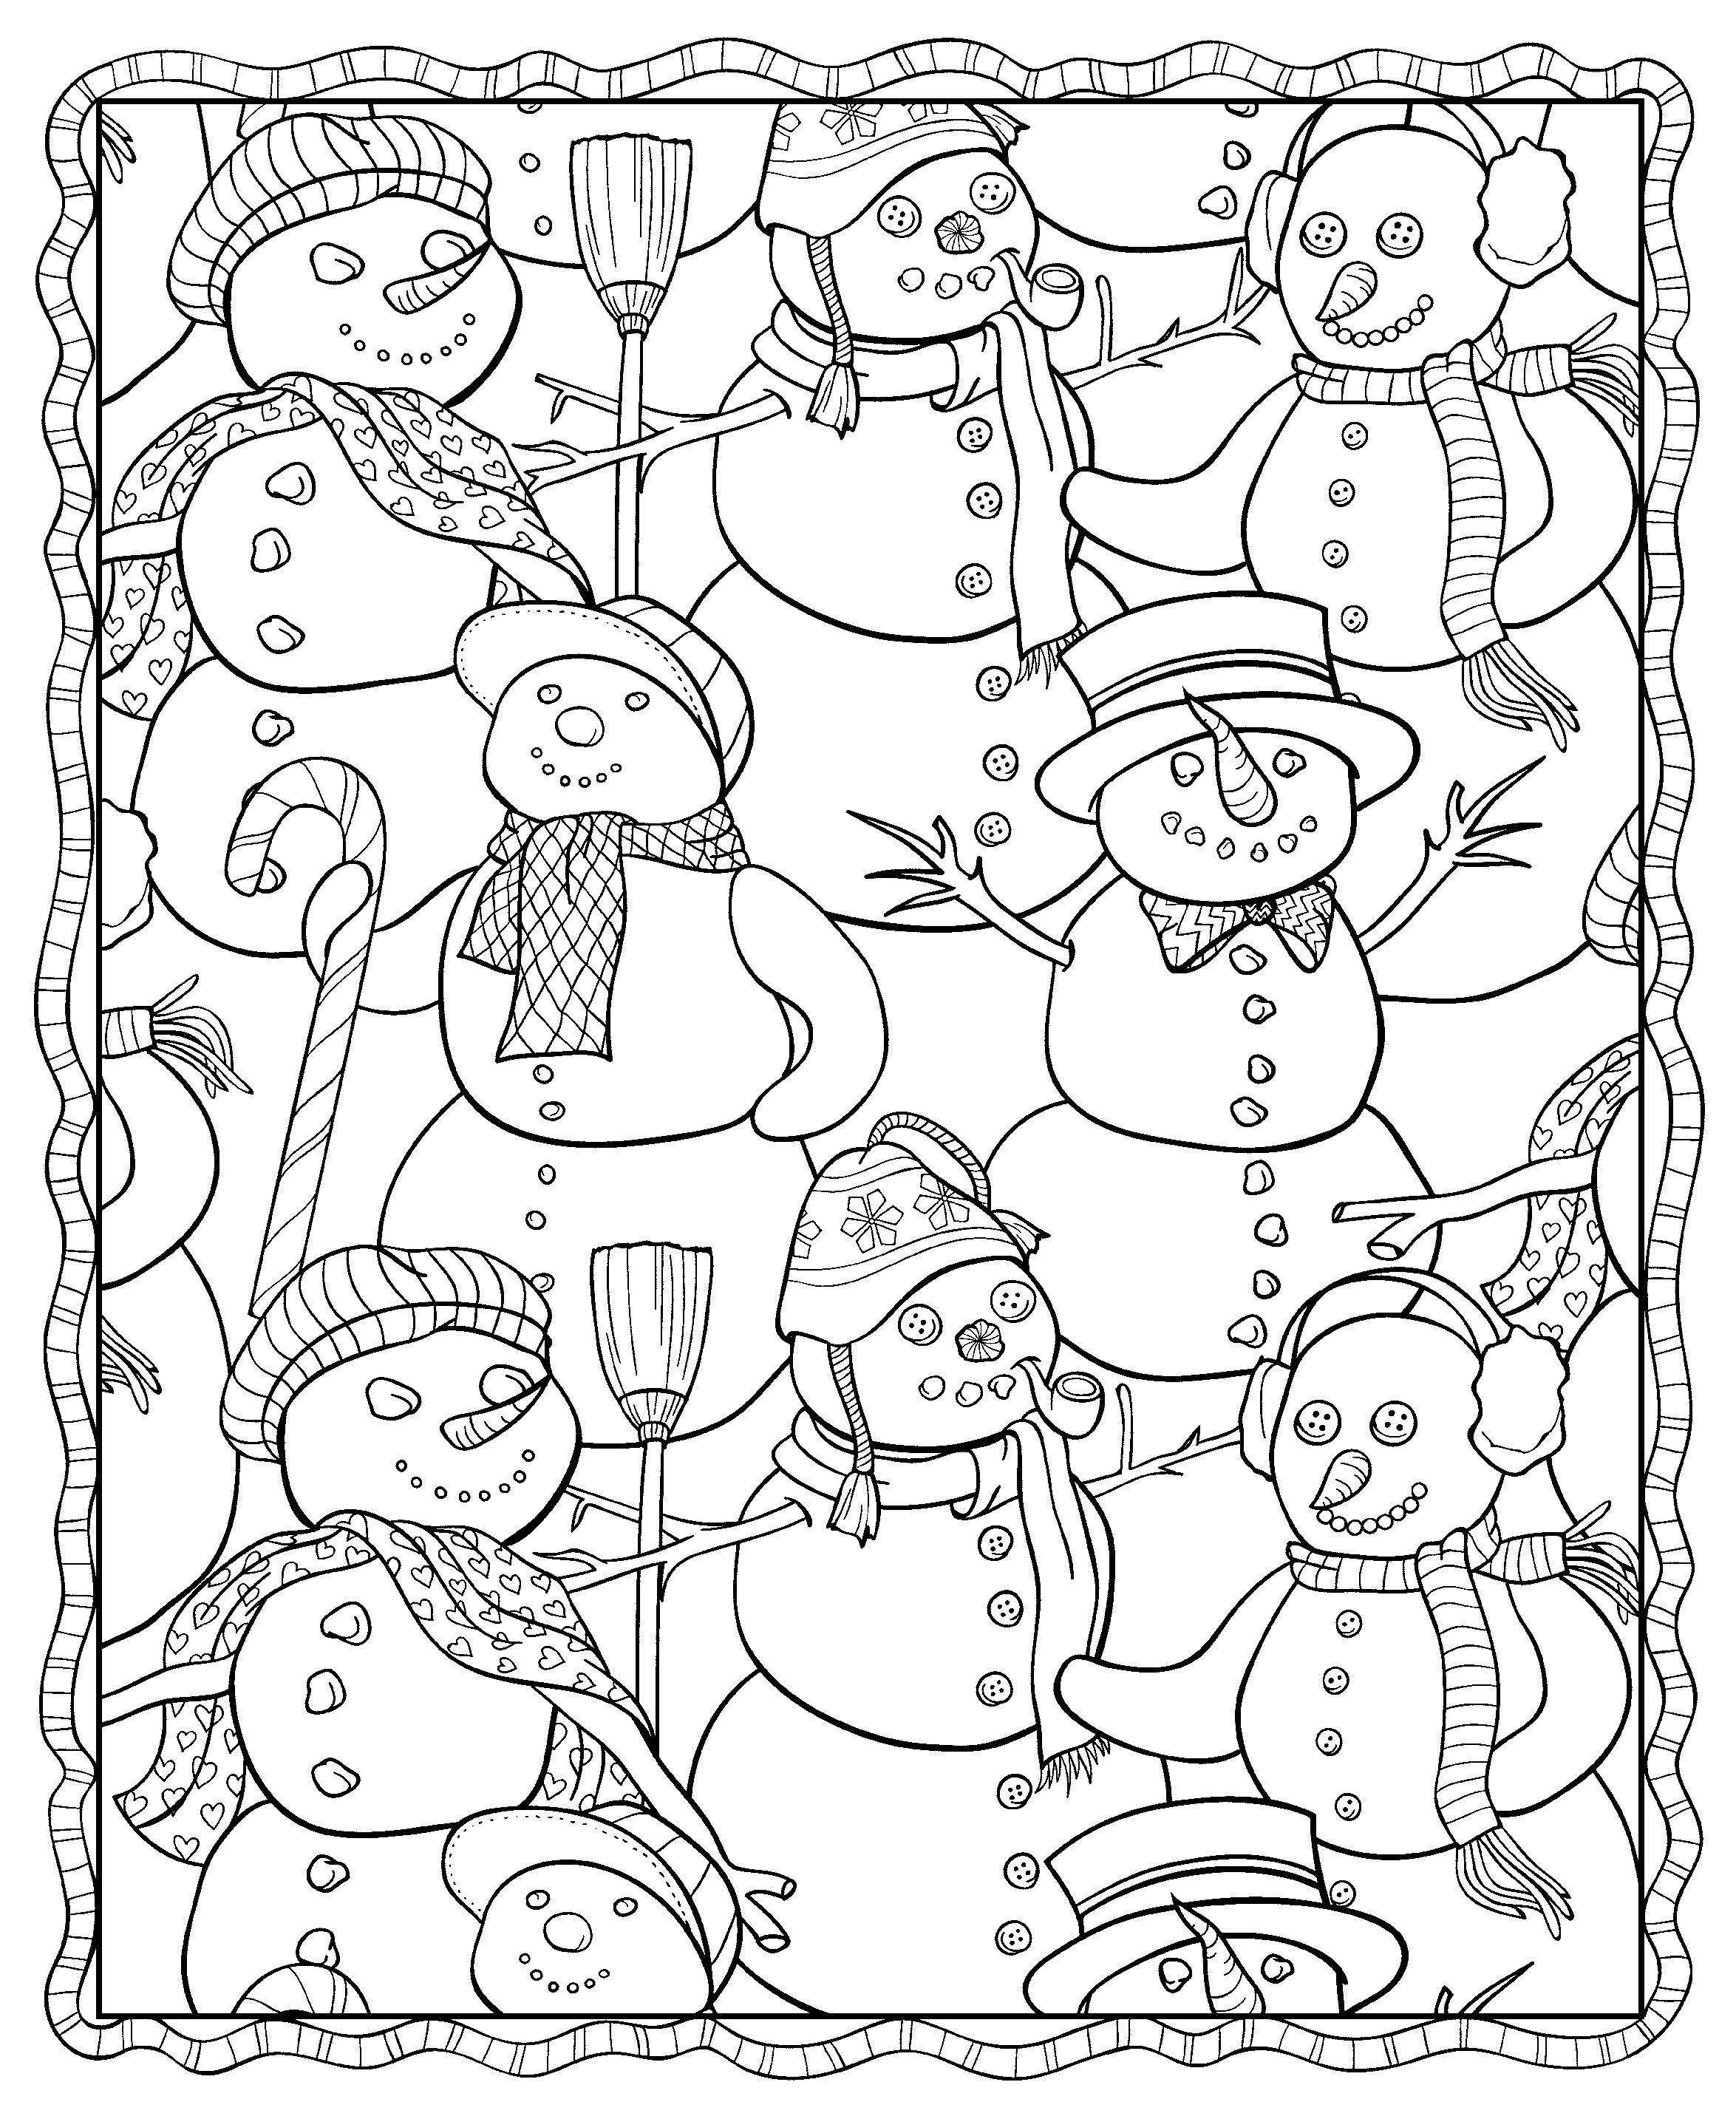 Coloring Pages Holiday Coloring Excelent Holiday Coloring Pages For Adults Image Ideas